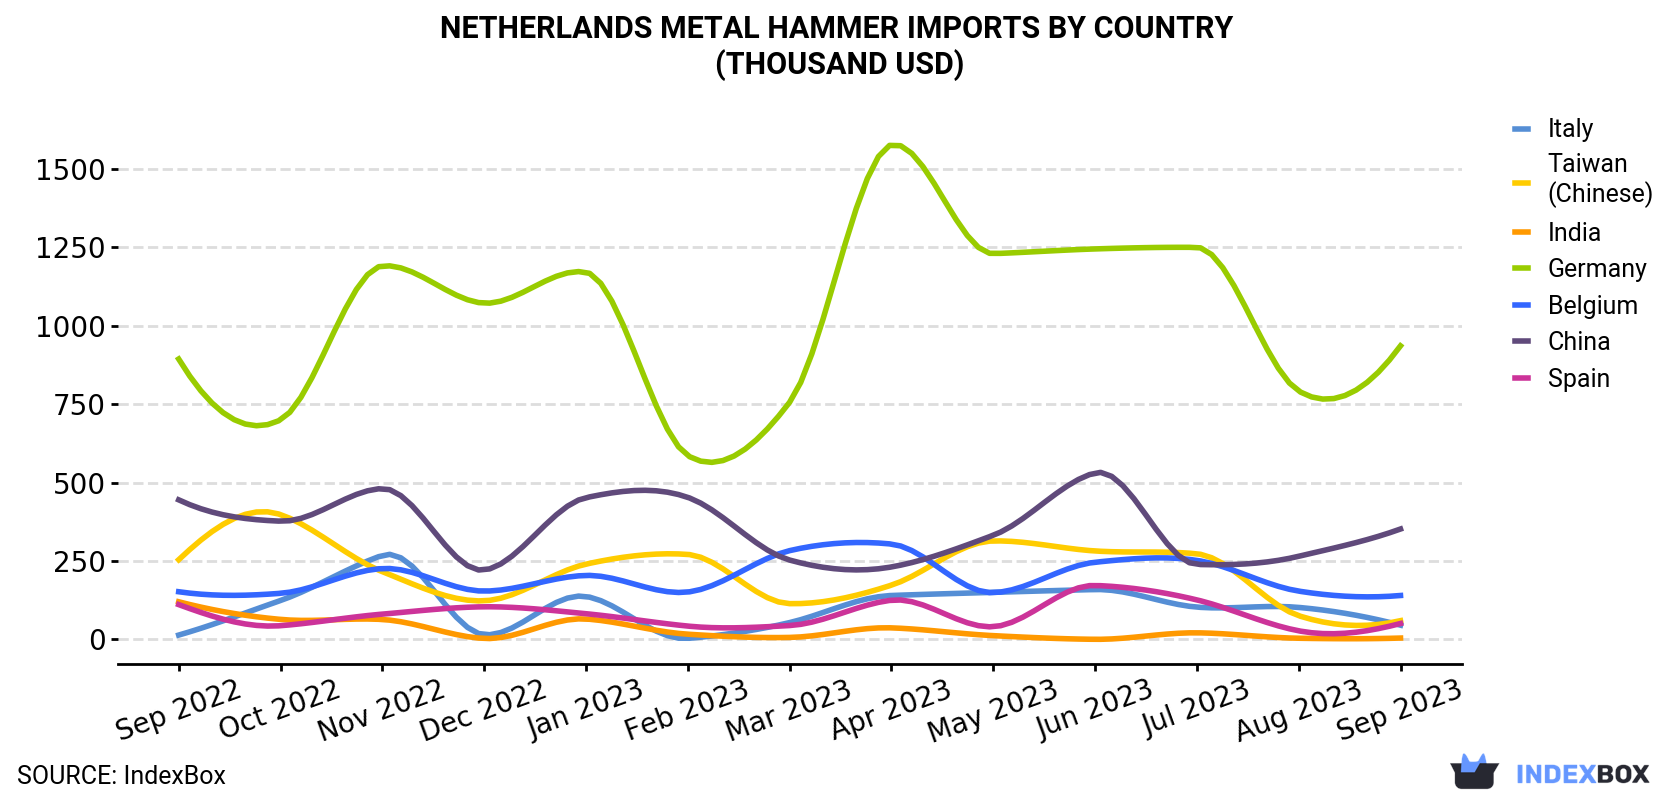 Netherlands Metal Hammer Imports By Country (Thousand USD)